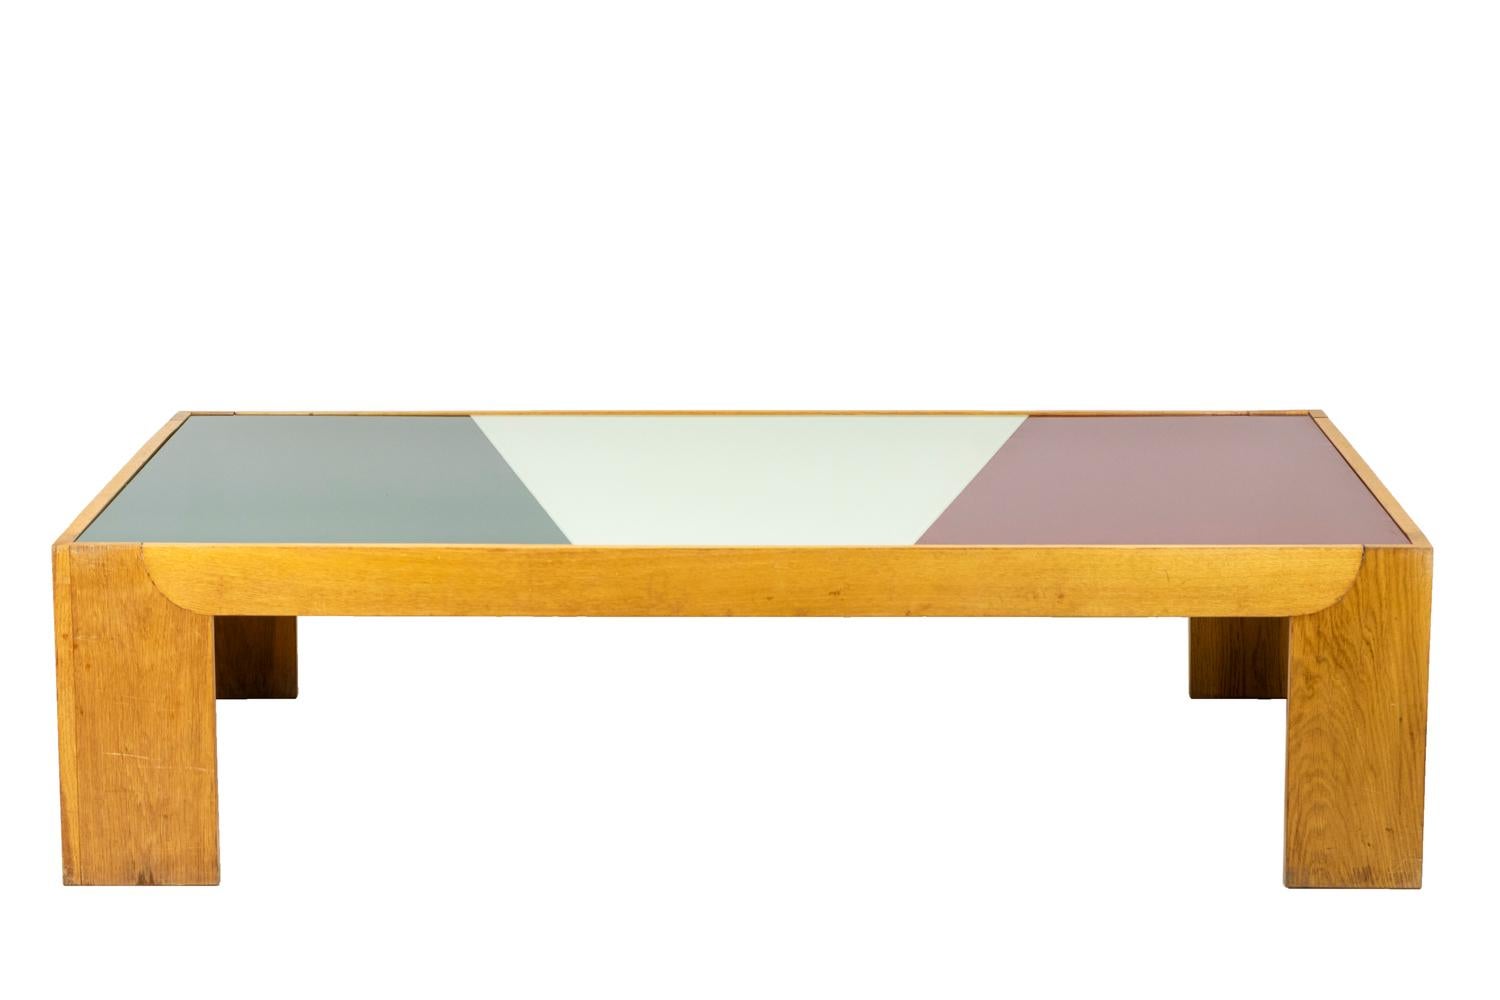 Large coffee table in blond oak.Tray composed of three glass plates tinted in green, white and red, assembled in staggered rows. Wide feet.

Work realized in the 1970’s.